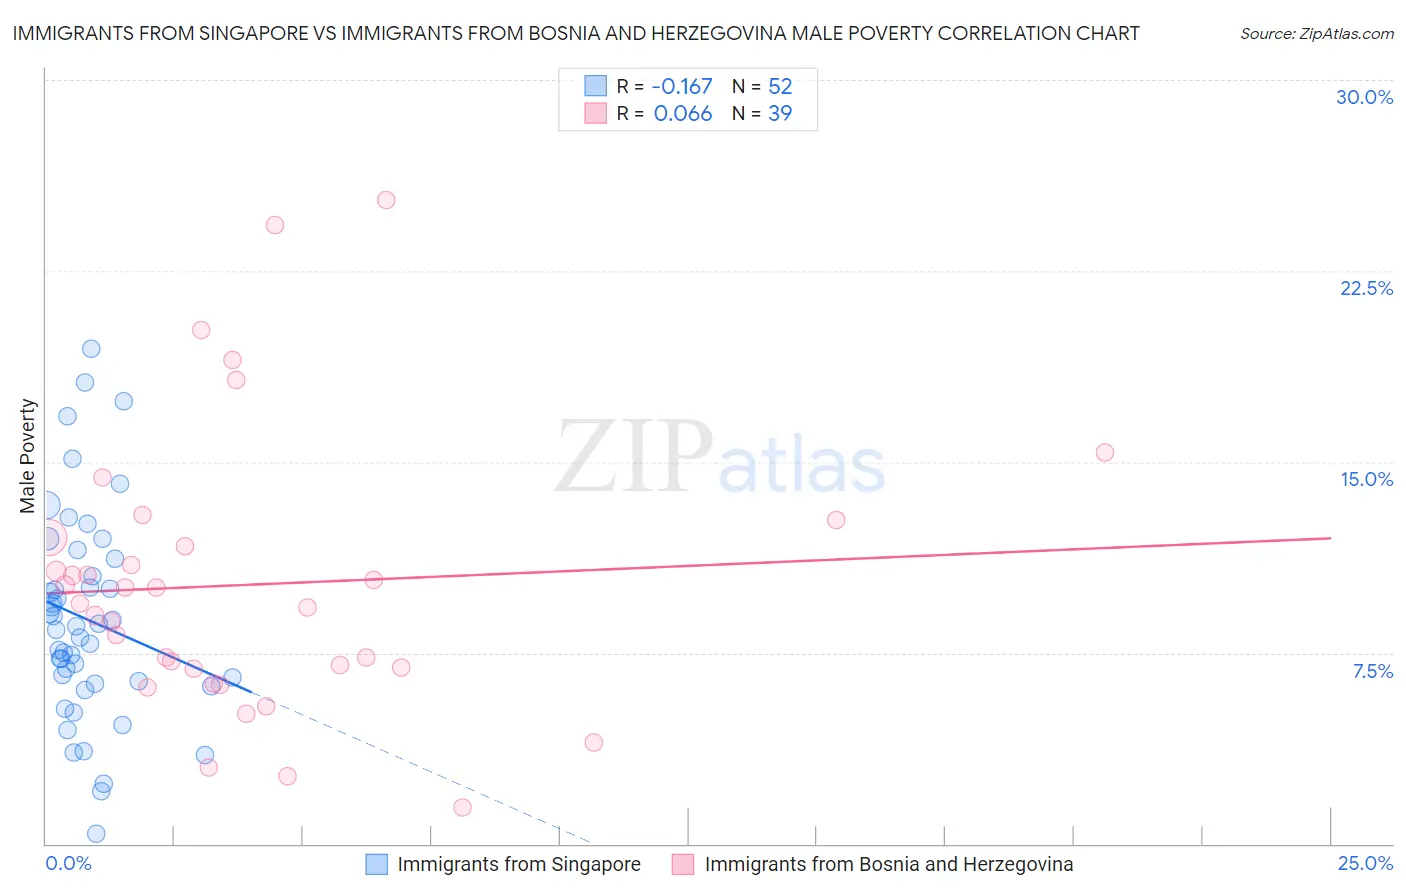 Immigrants from Singapore vs Immigrants from Bosnia and Herzegovina Male Poverty